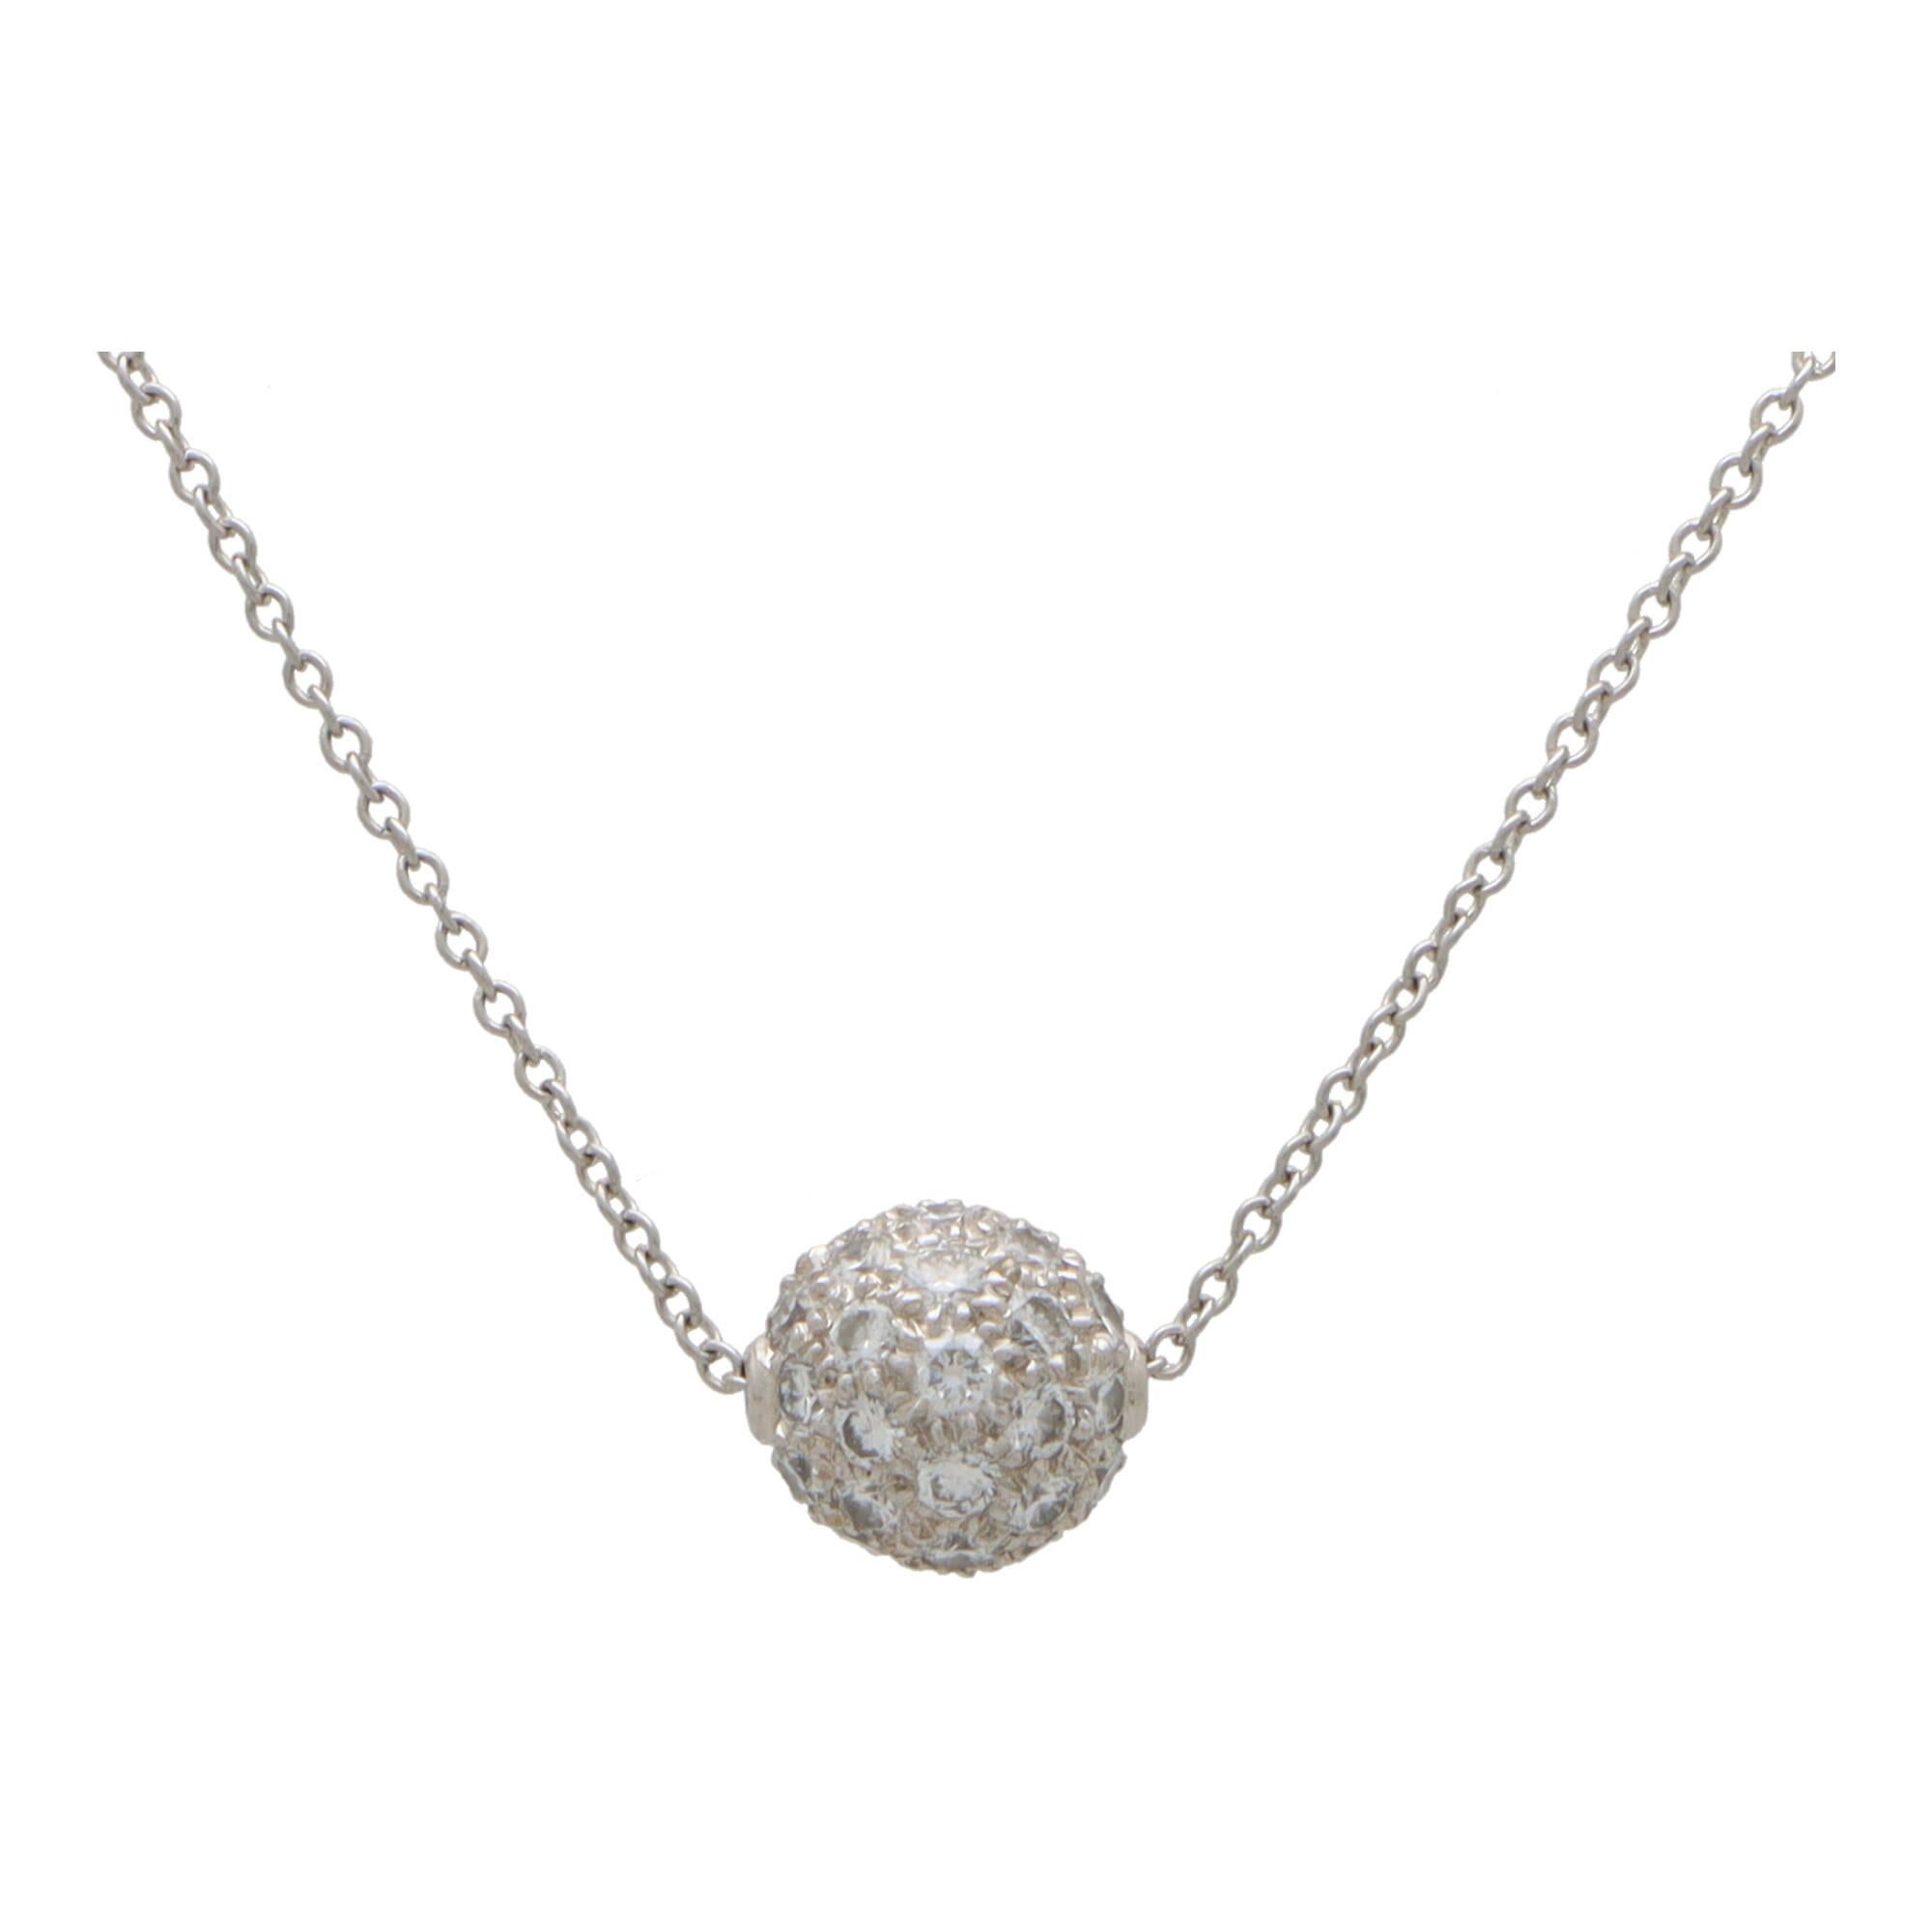 A beautiful vintage Tiffany & Co. diamond ball necklace set in platinum. 

The pendant is composed of a solid platinum ball which is completely pave set with 42 round brilliant cut diamonds. The ball hangs from a 16-inch Tiffany platinum trace